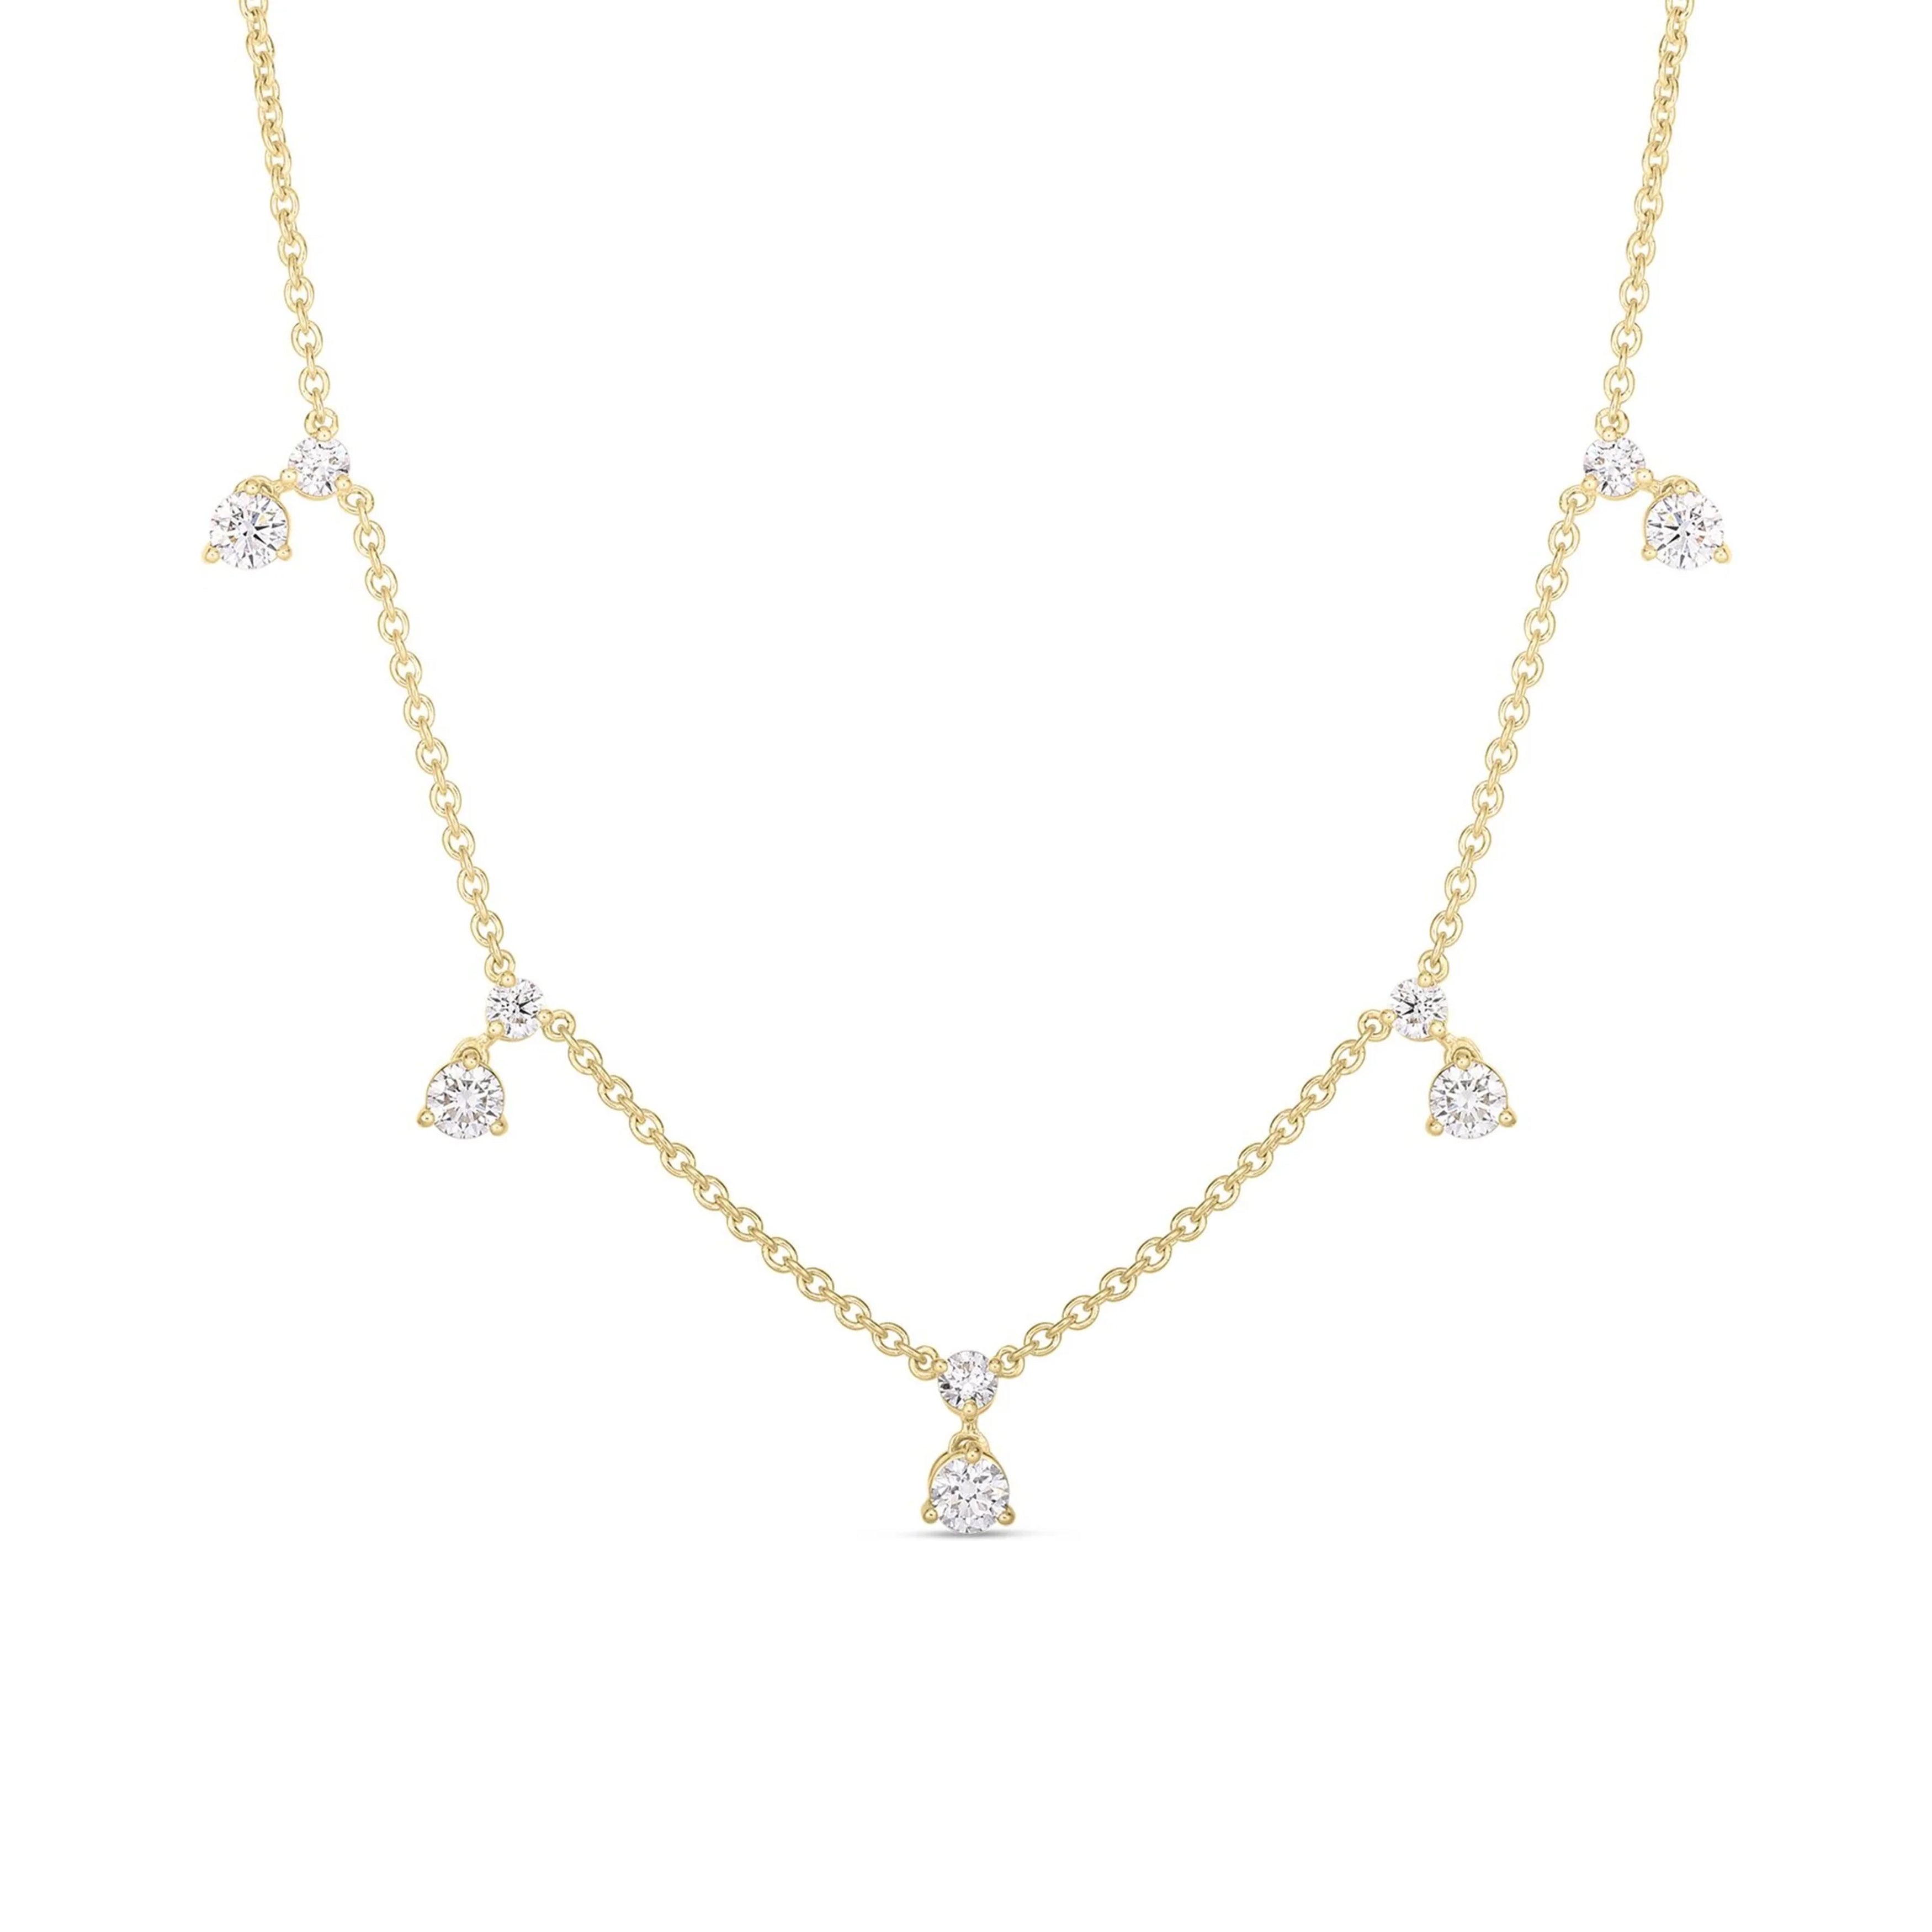 18K Yellow Gold Roberto Coin 5 Station Diamond Necklace